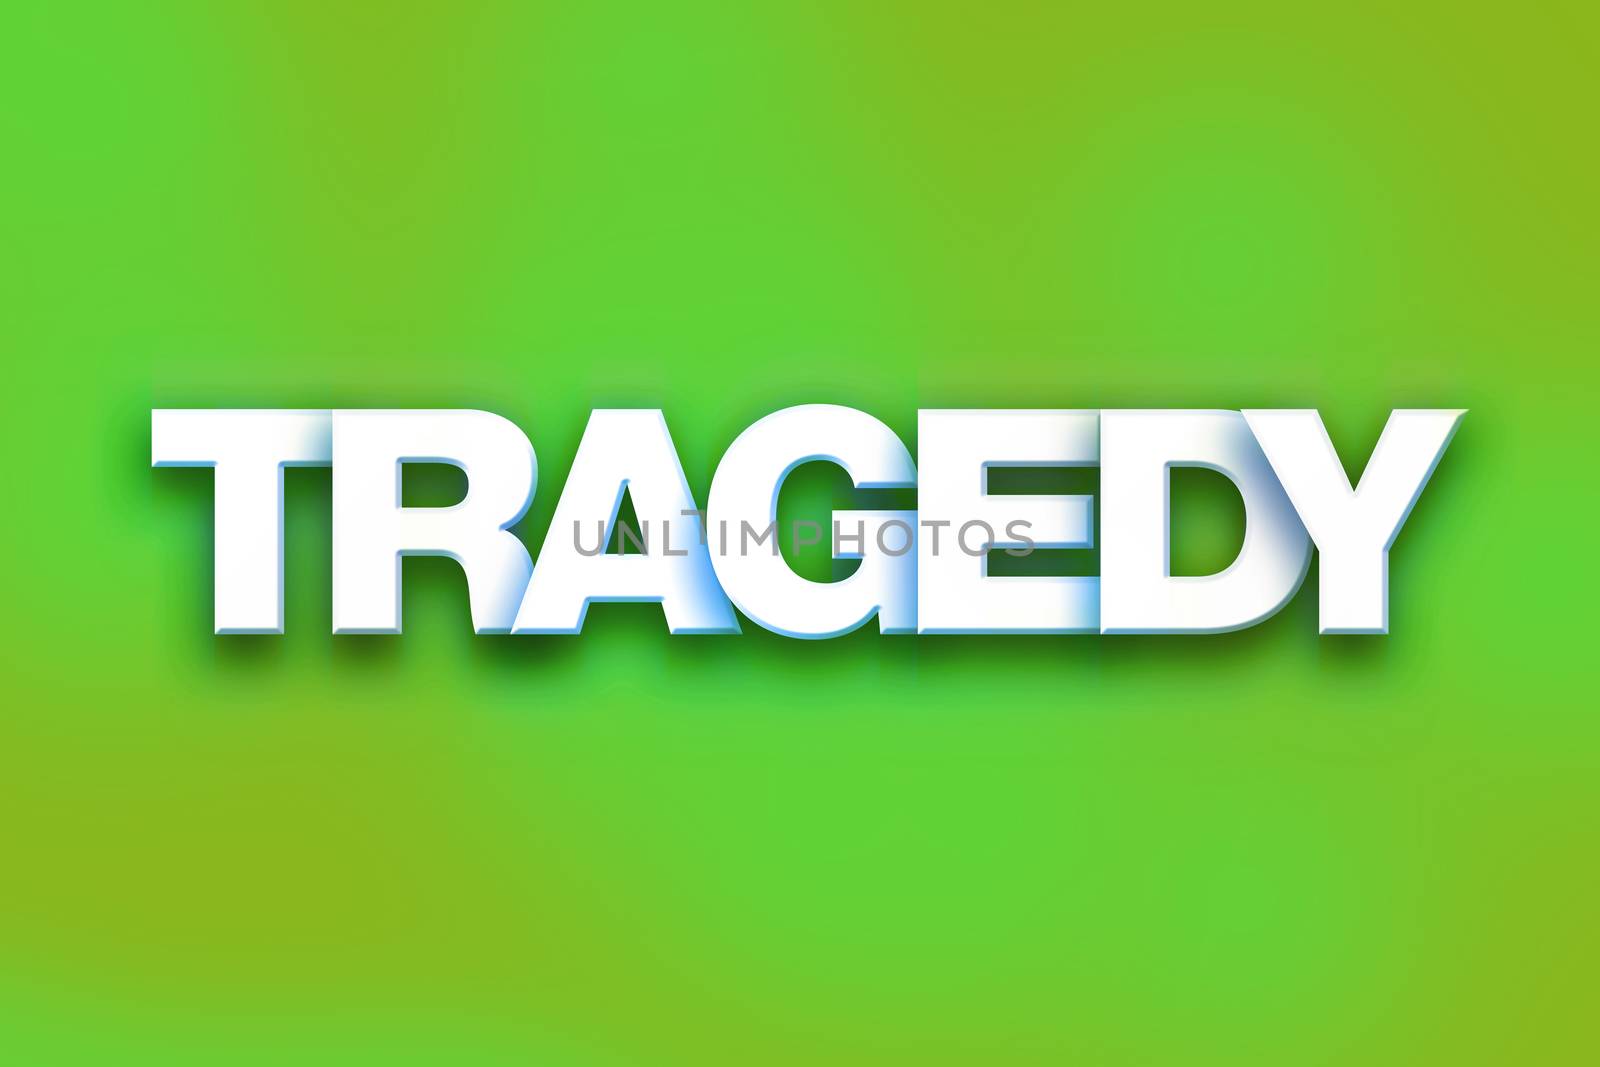 The word "Tragedy" written in white 3D letters on a colorful background concept and theme.